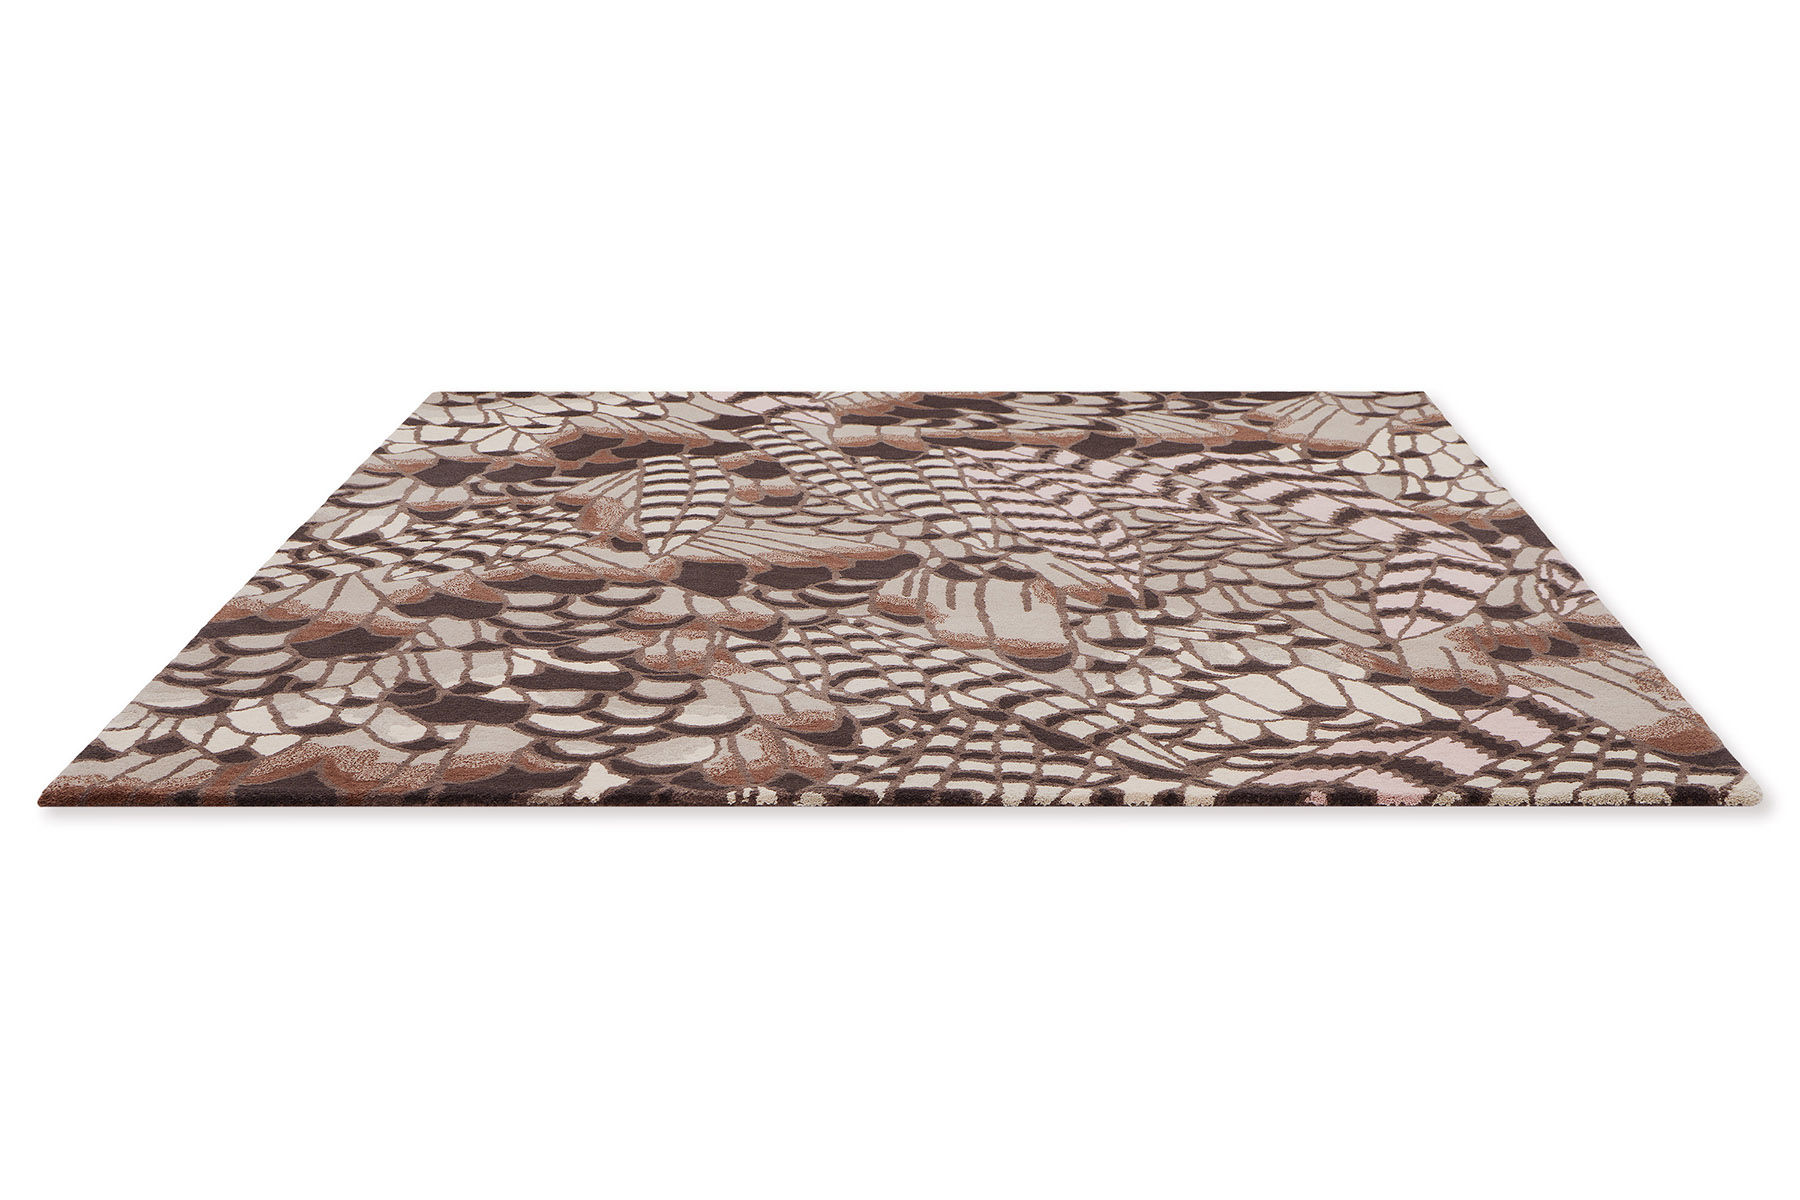 Feathers Natural Designer Rug ☞ Size: 4' 7" x 6' 7" (140 x 200 cm)